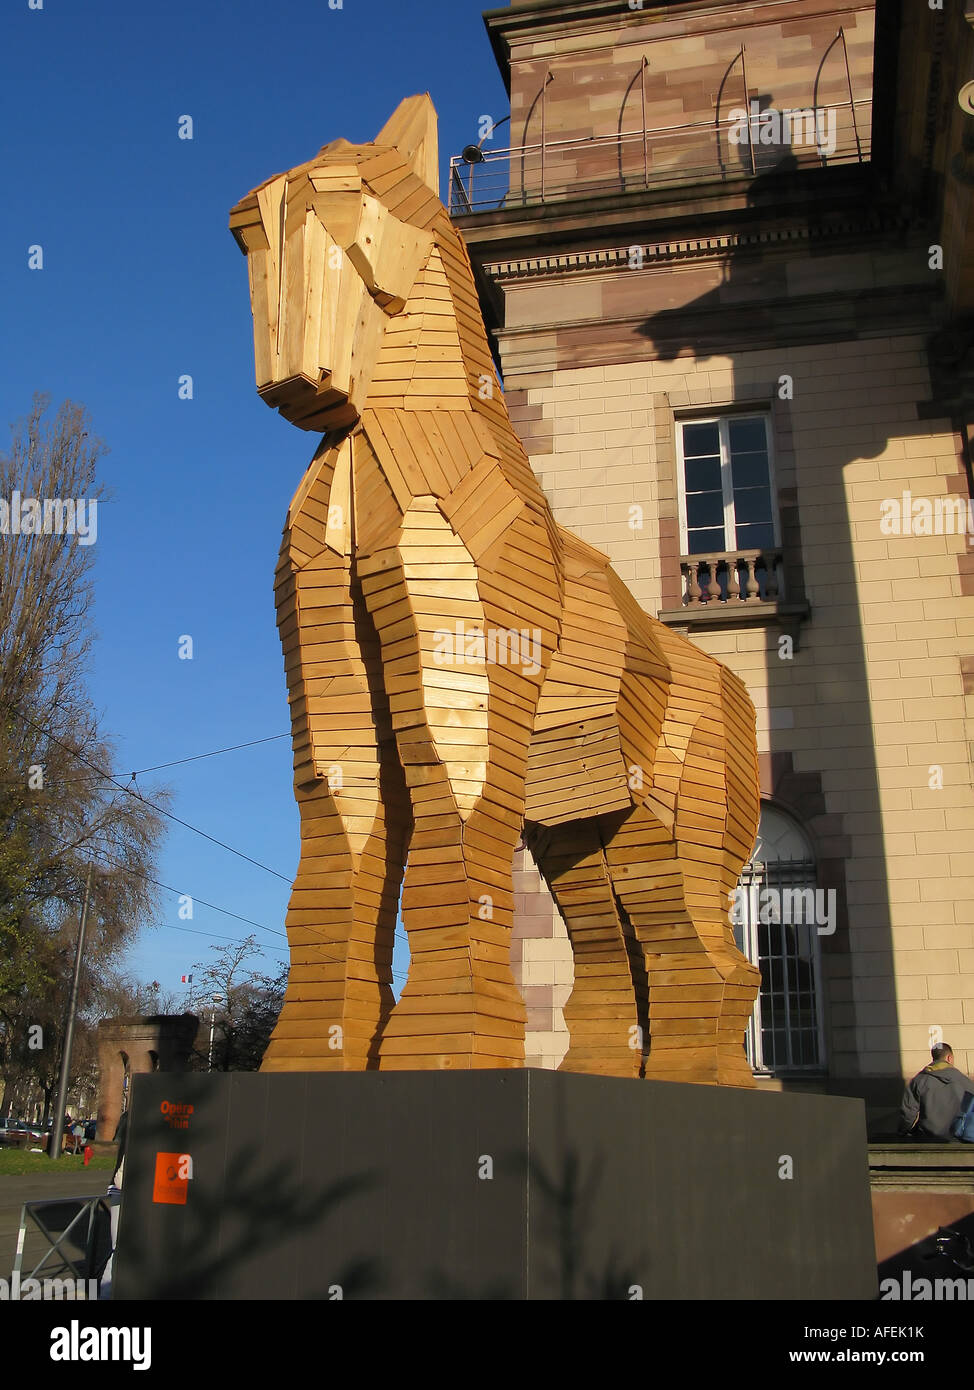 Wooden Trojan horse by Philippe Miesch, in front of Opera house, Strasbourg, Alsace, France, Europe Stock Photo